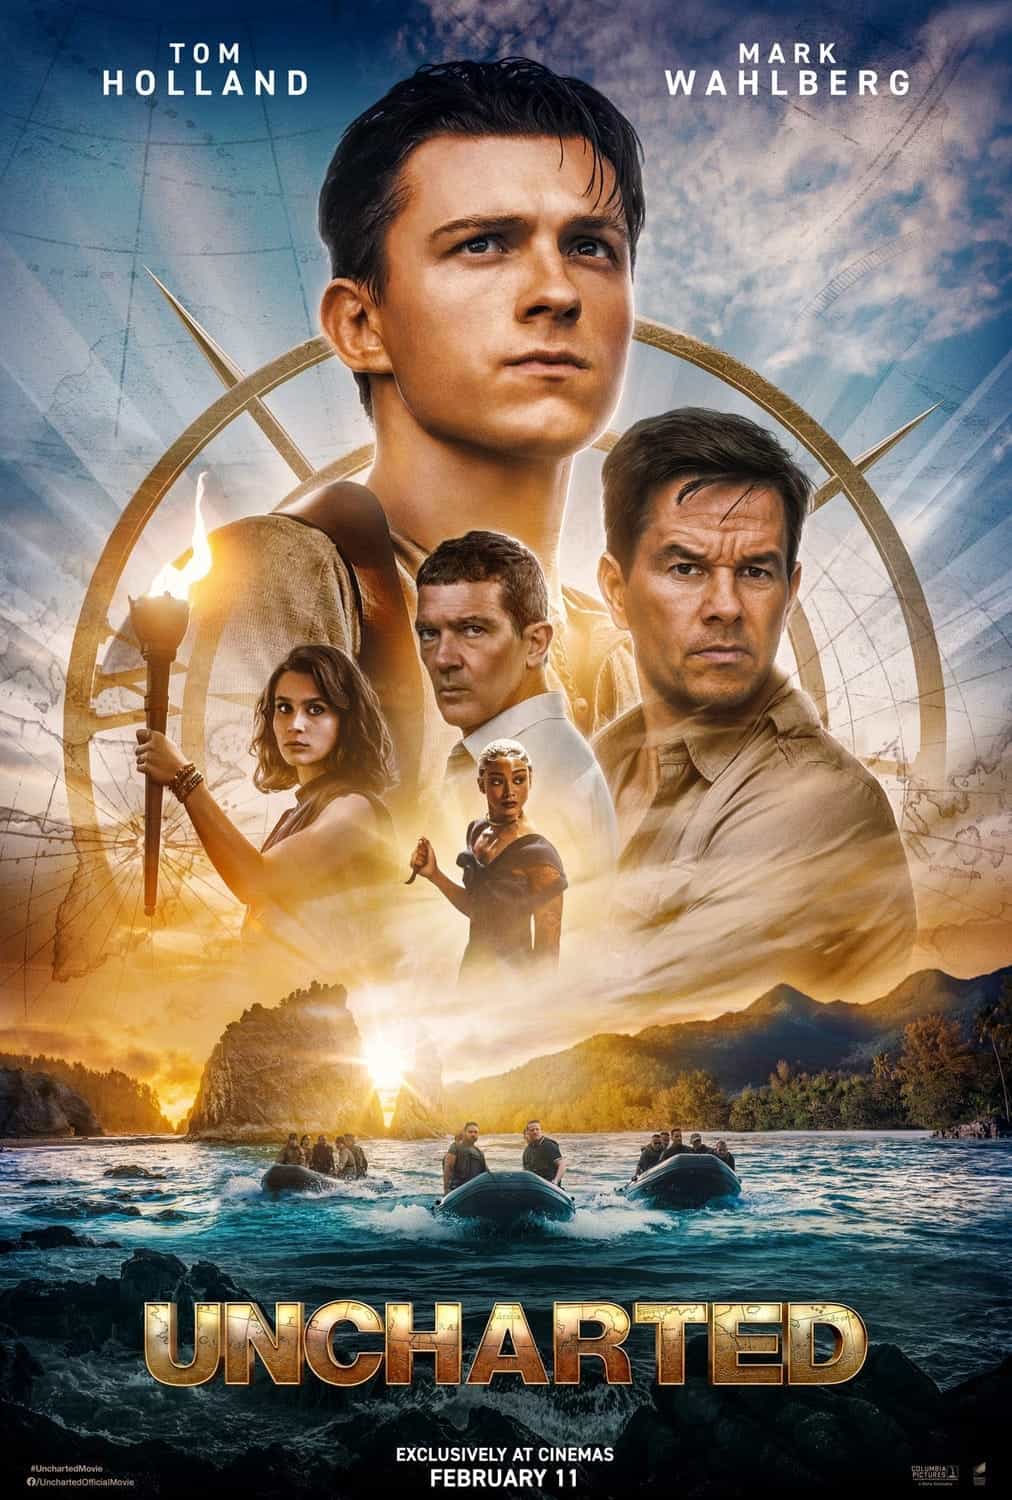 Another new poster has been released for Uncharted starring Tom Holland - movie UK release date 11th February 2022 #uncharted